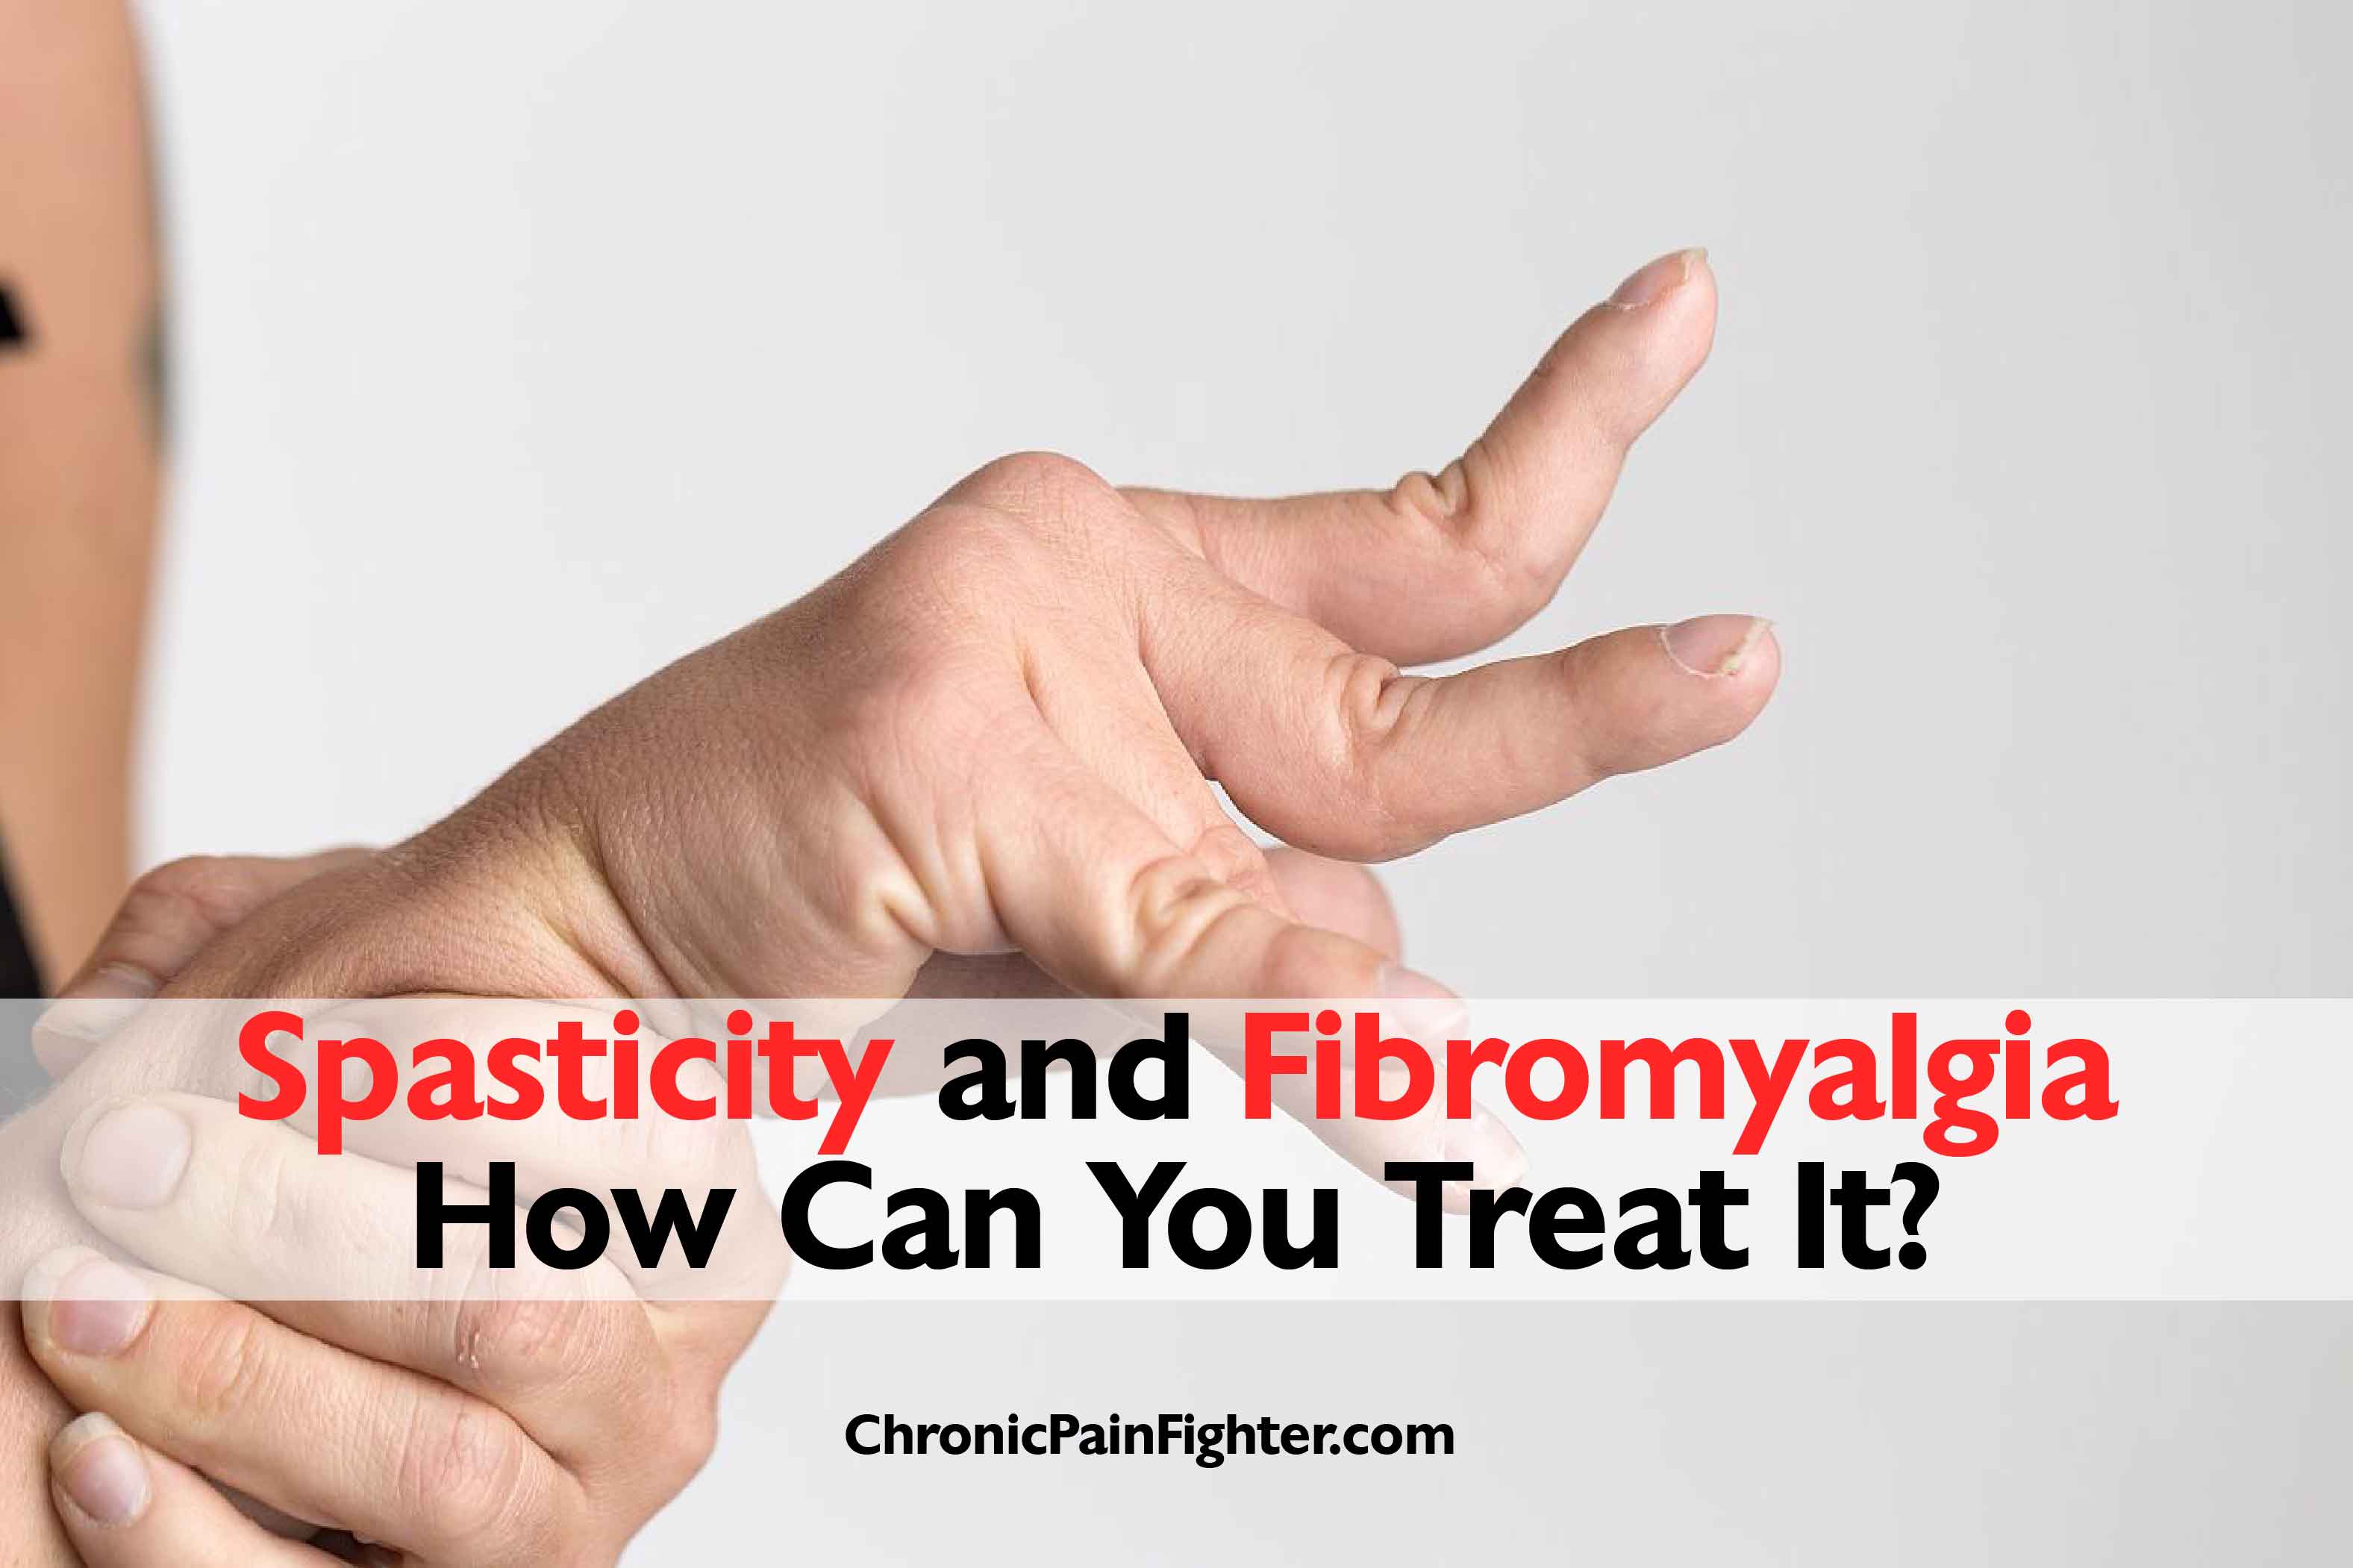 Spasticity and Fibromyalgia. How Can You Treat It?